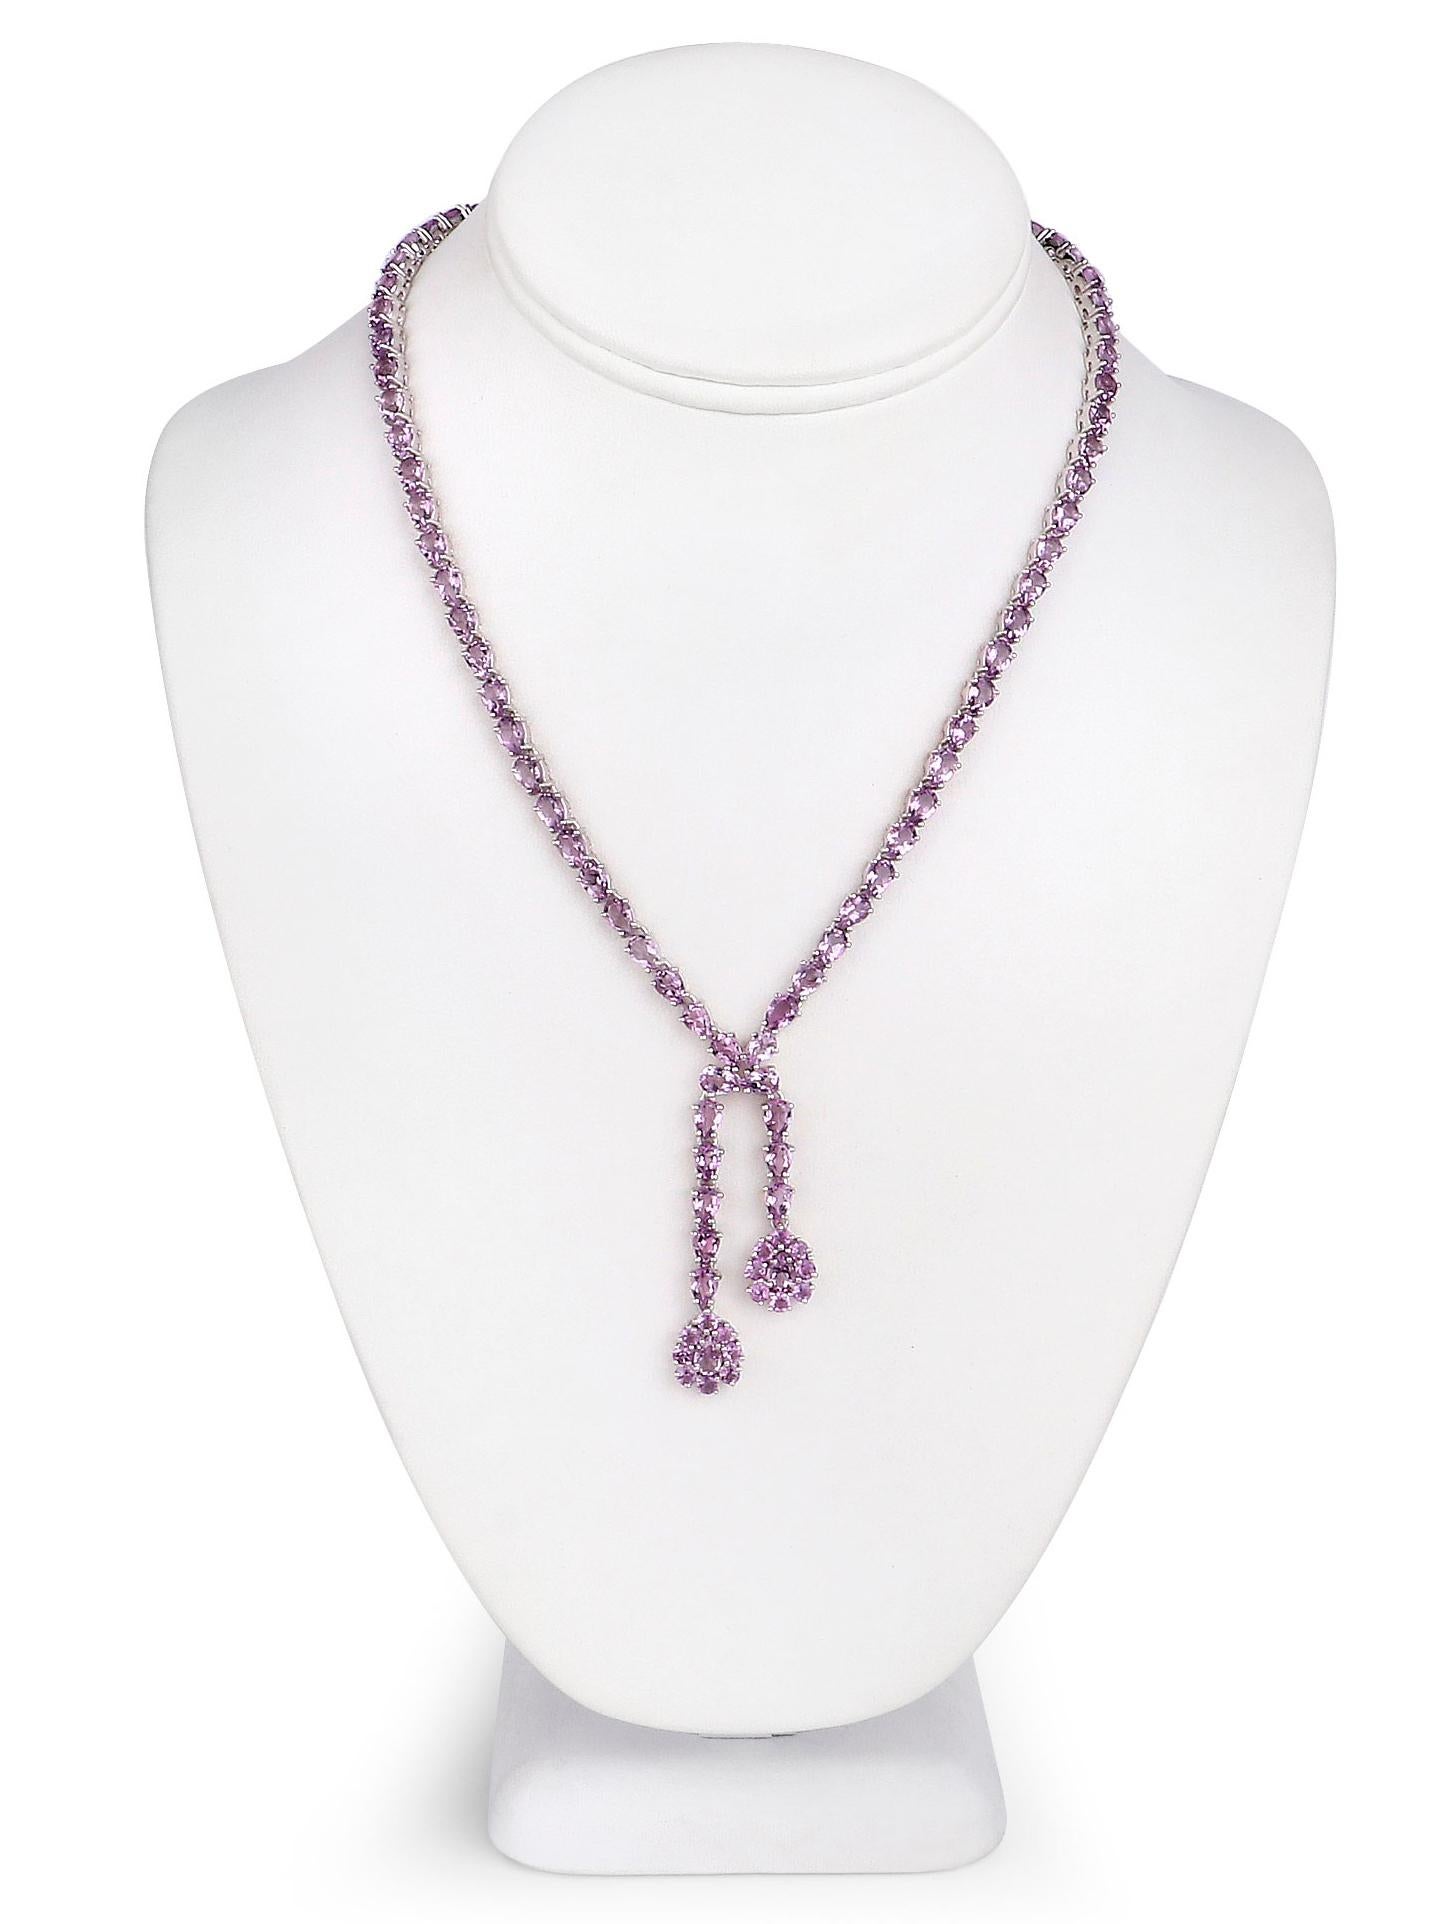 Vintage Natural Amethyst Double Drop Necklace 32 Carats Sterling Silver In Excellent Condition For Sale In Laguna Niguel, CA